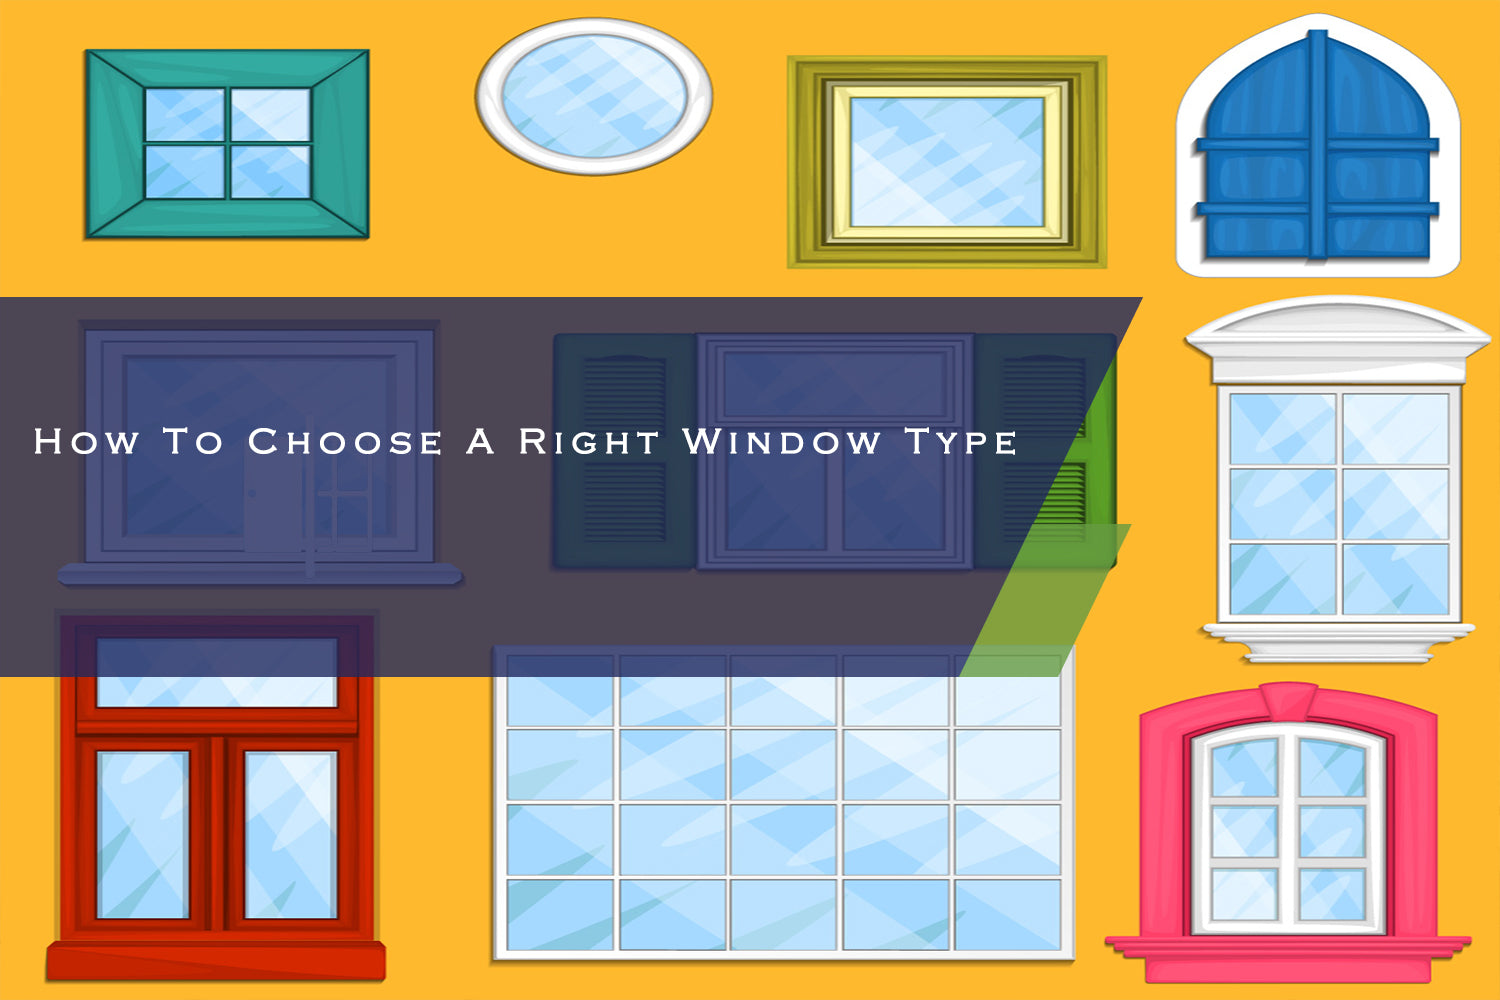 How To Choose A Right Window Type?